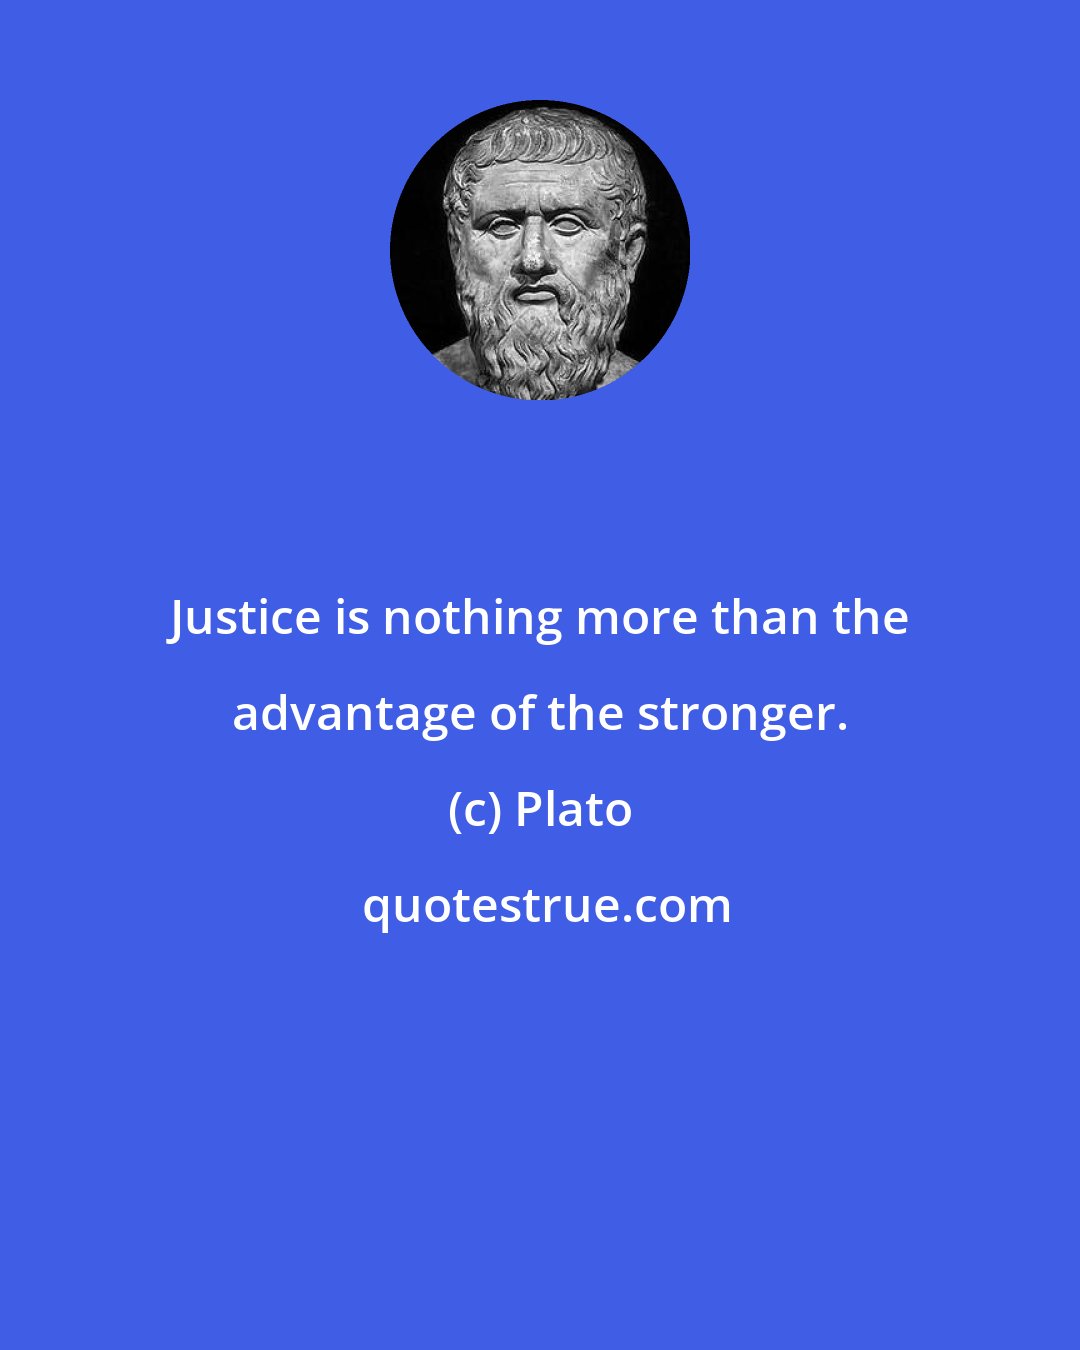 Plato: Justice is nothing more than the advantage of the stronger.